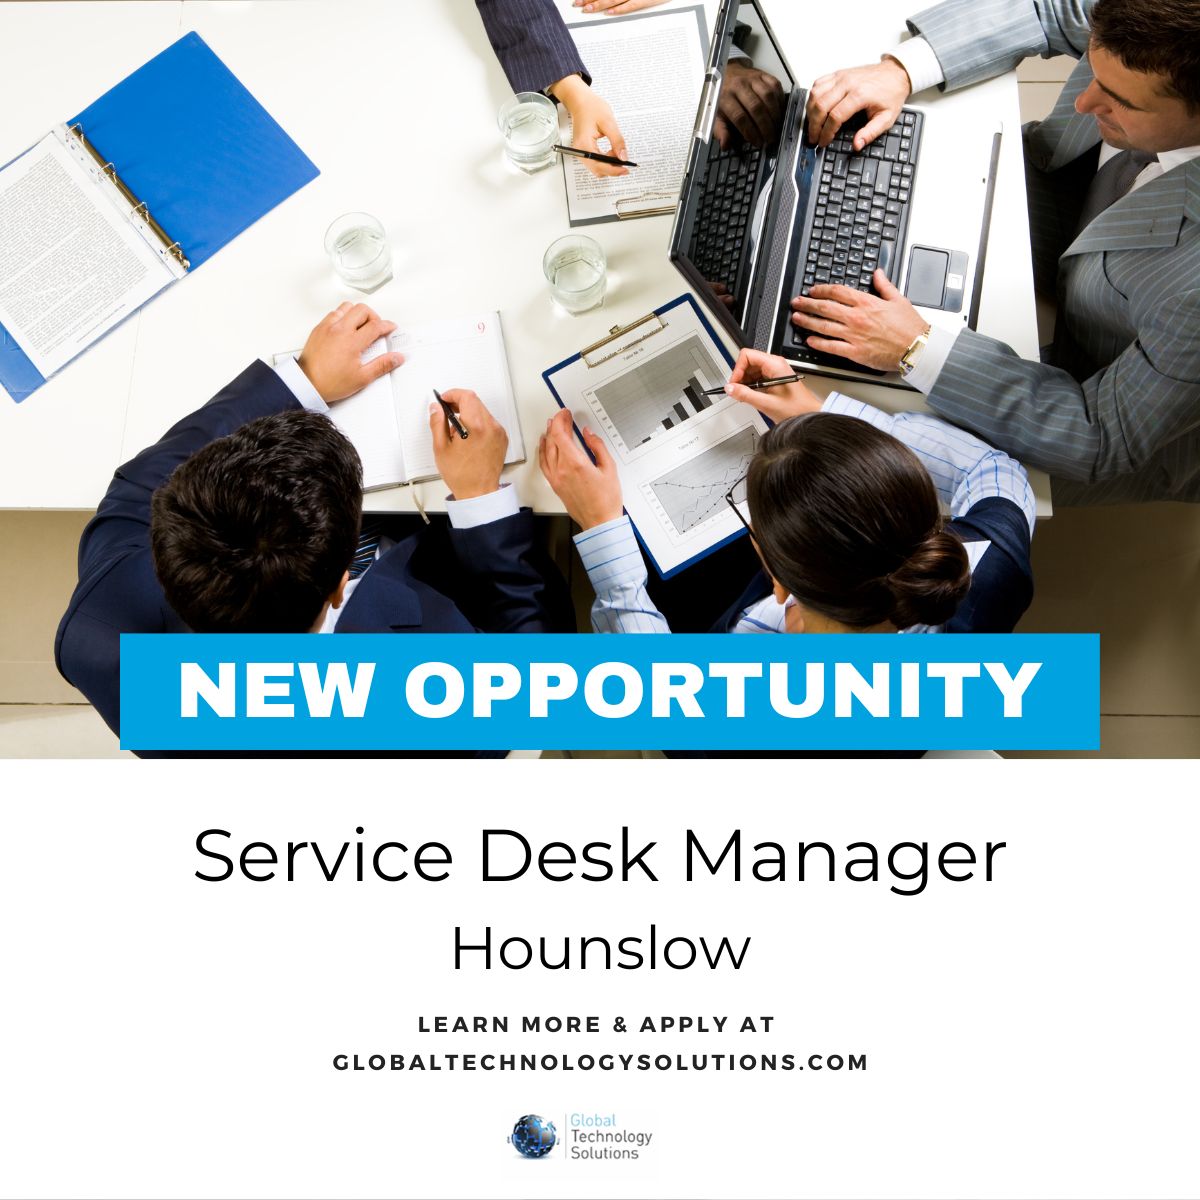 Service Desk Manager working in Hounslow